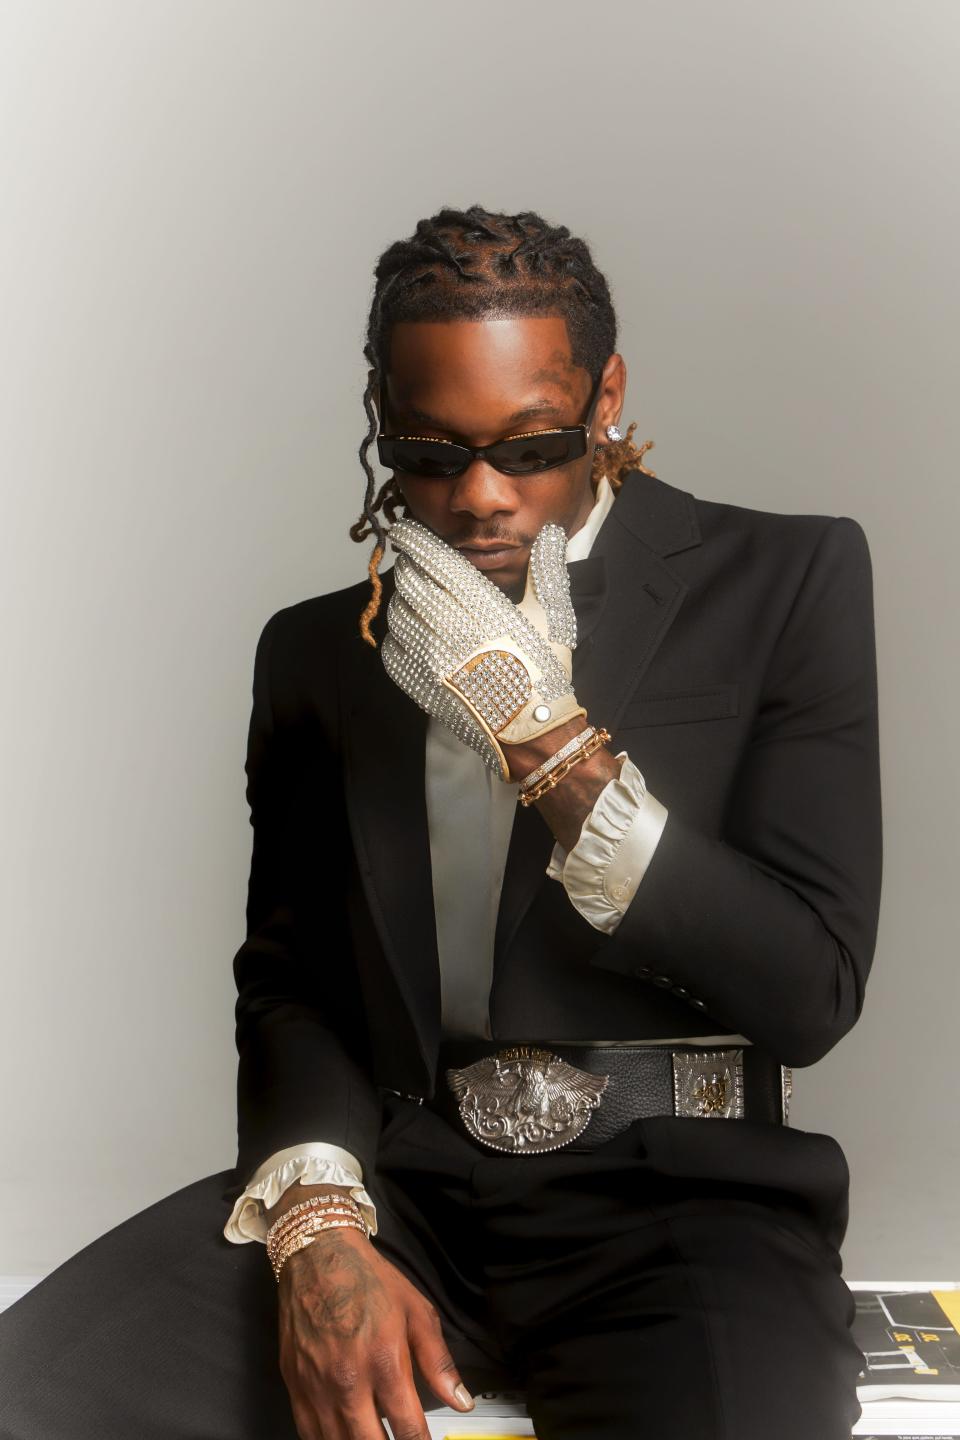 Rapper Offset says Michael Jackson has always been one of his biggest inspirations, not just musically, but because of his work ethic and drive.